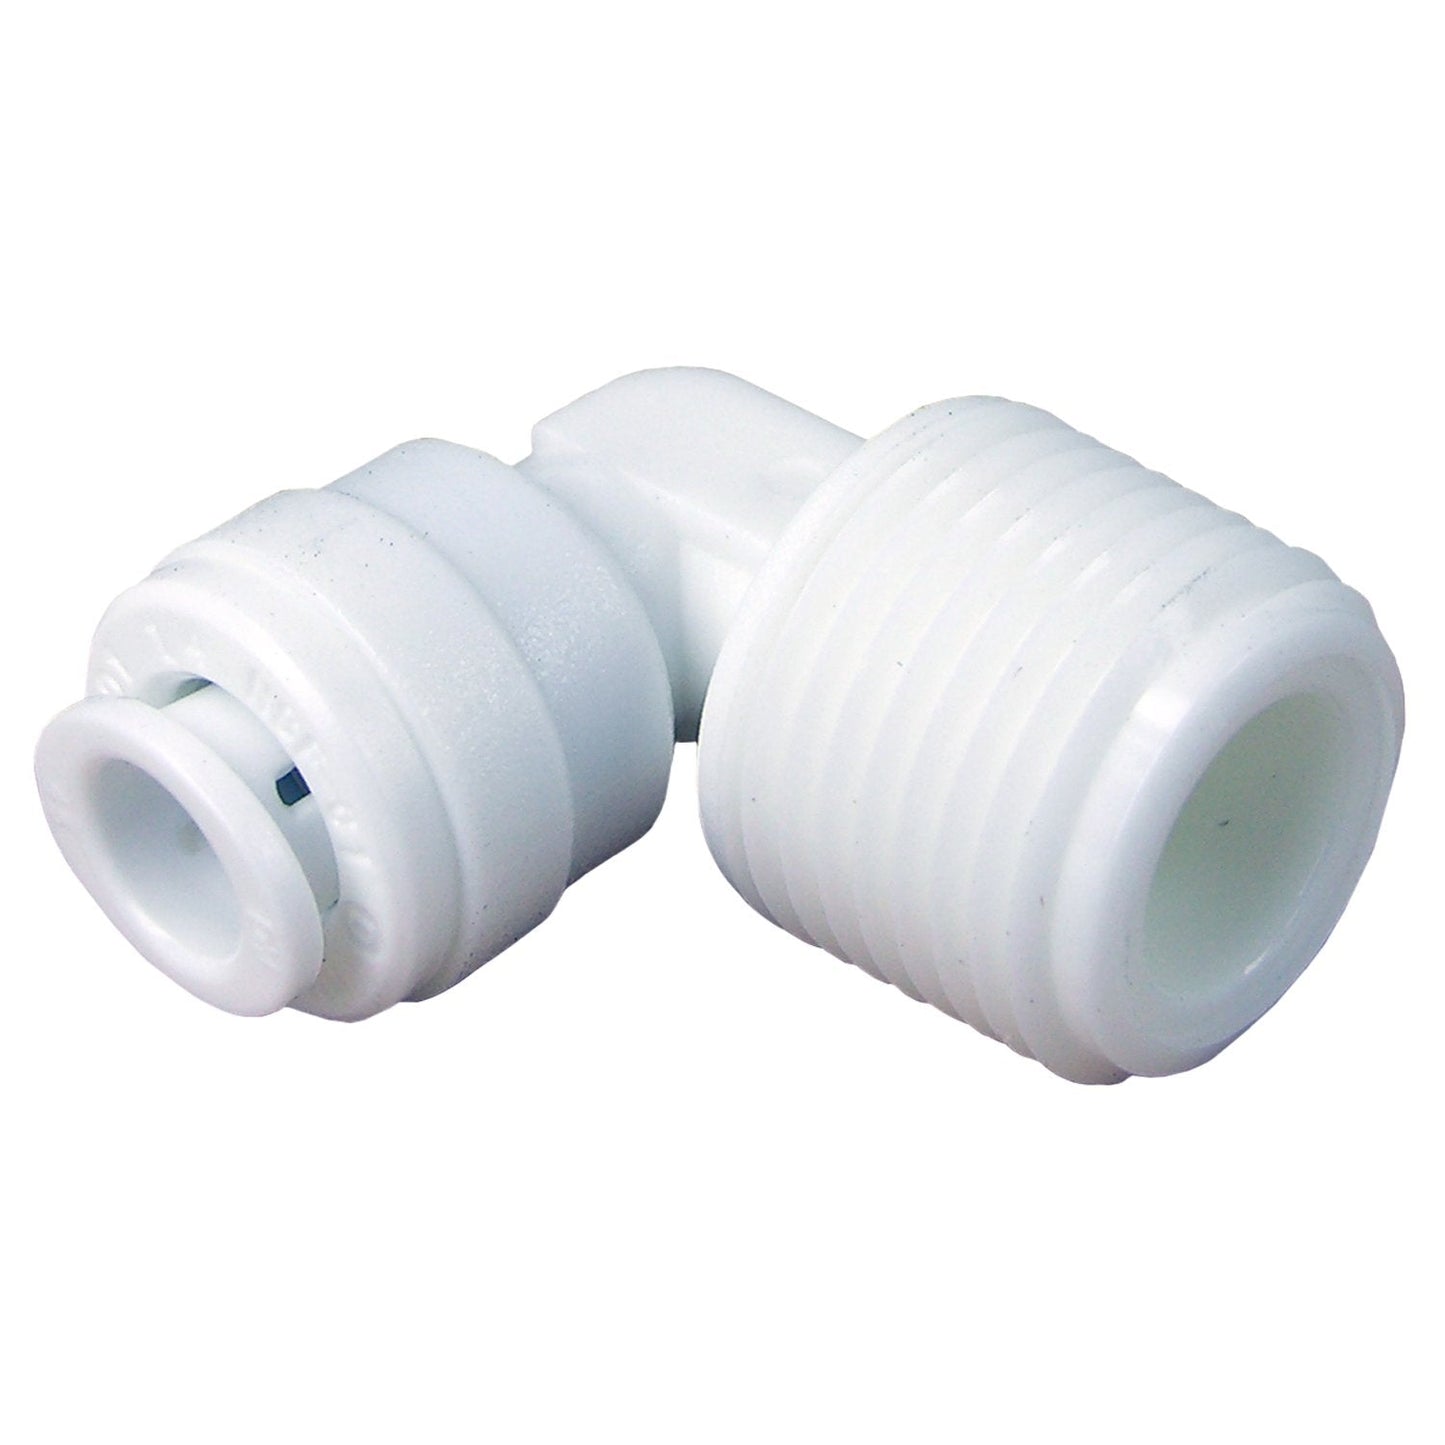 1/4" to 1/2" Male Threaded 90 Elbow Coupling